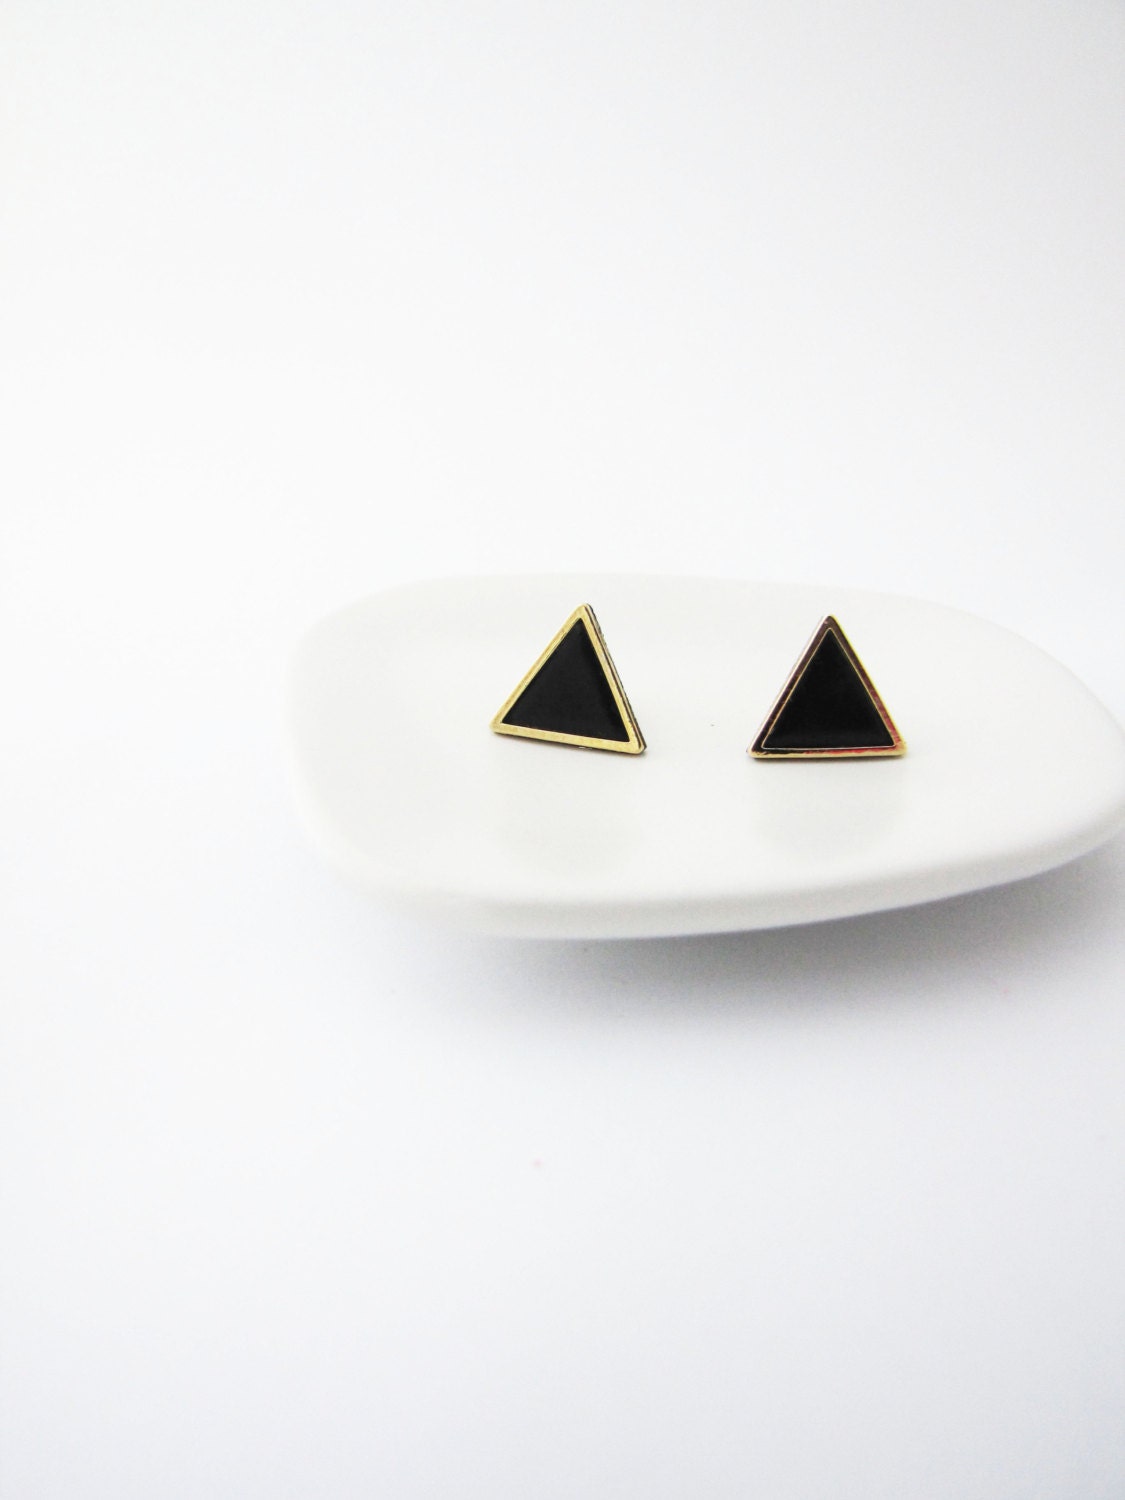 Black  gold triangle stud earrings. Simple posts. Geometric studs. Everyday post earrings. Fall trends polymer clay - Nuann